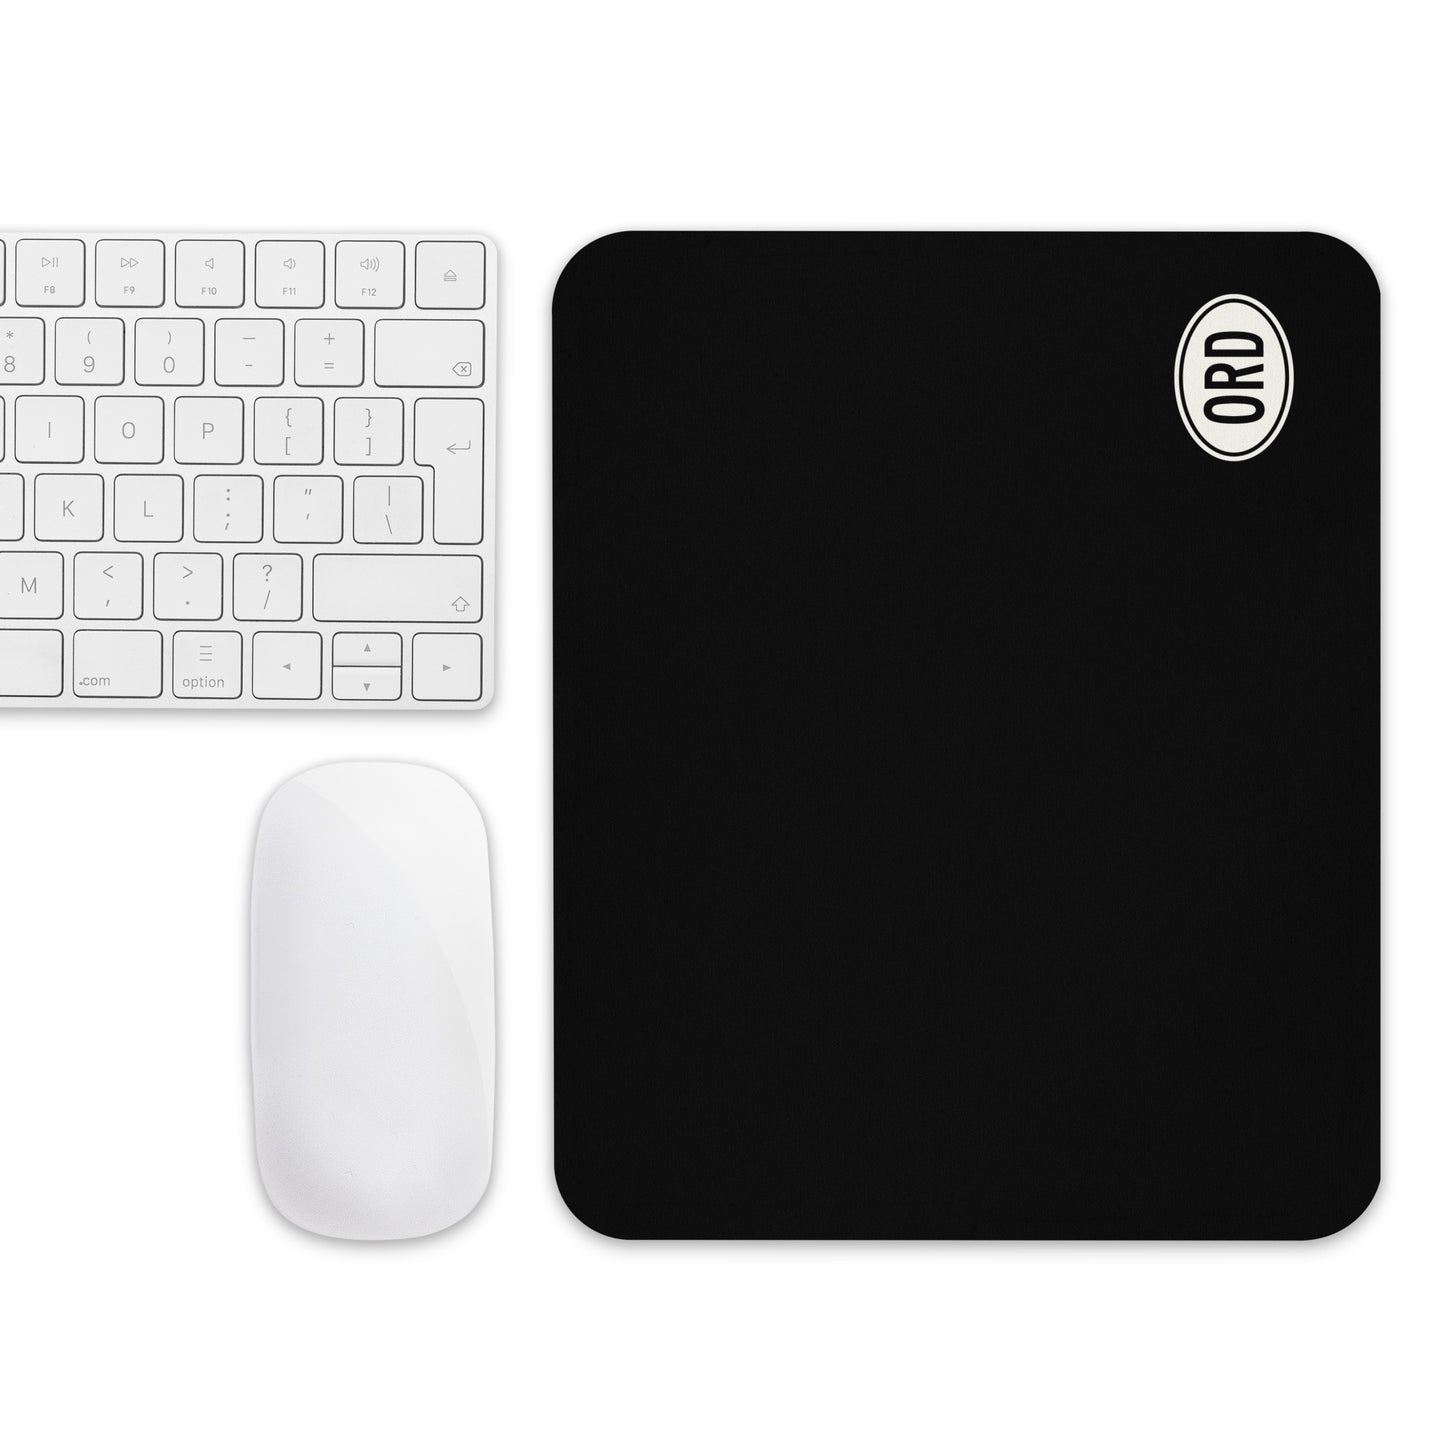 Unique Travel Gift Mouse Pad - White Oval • ORD Chicago • YHM Designs - Image 04